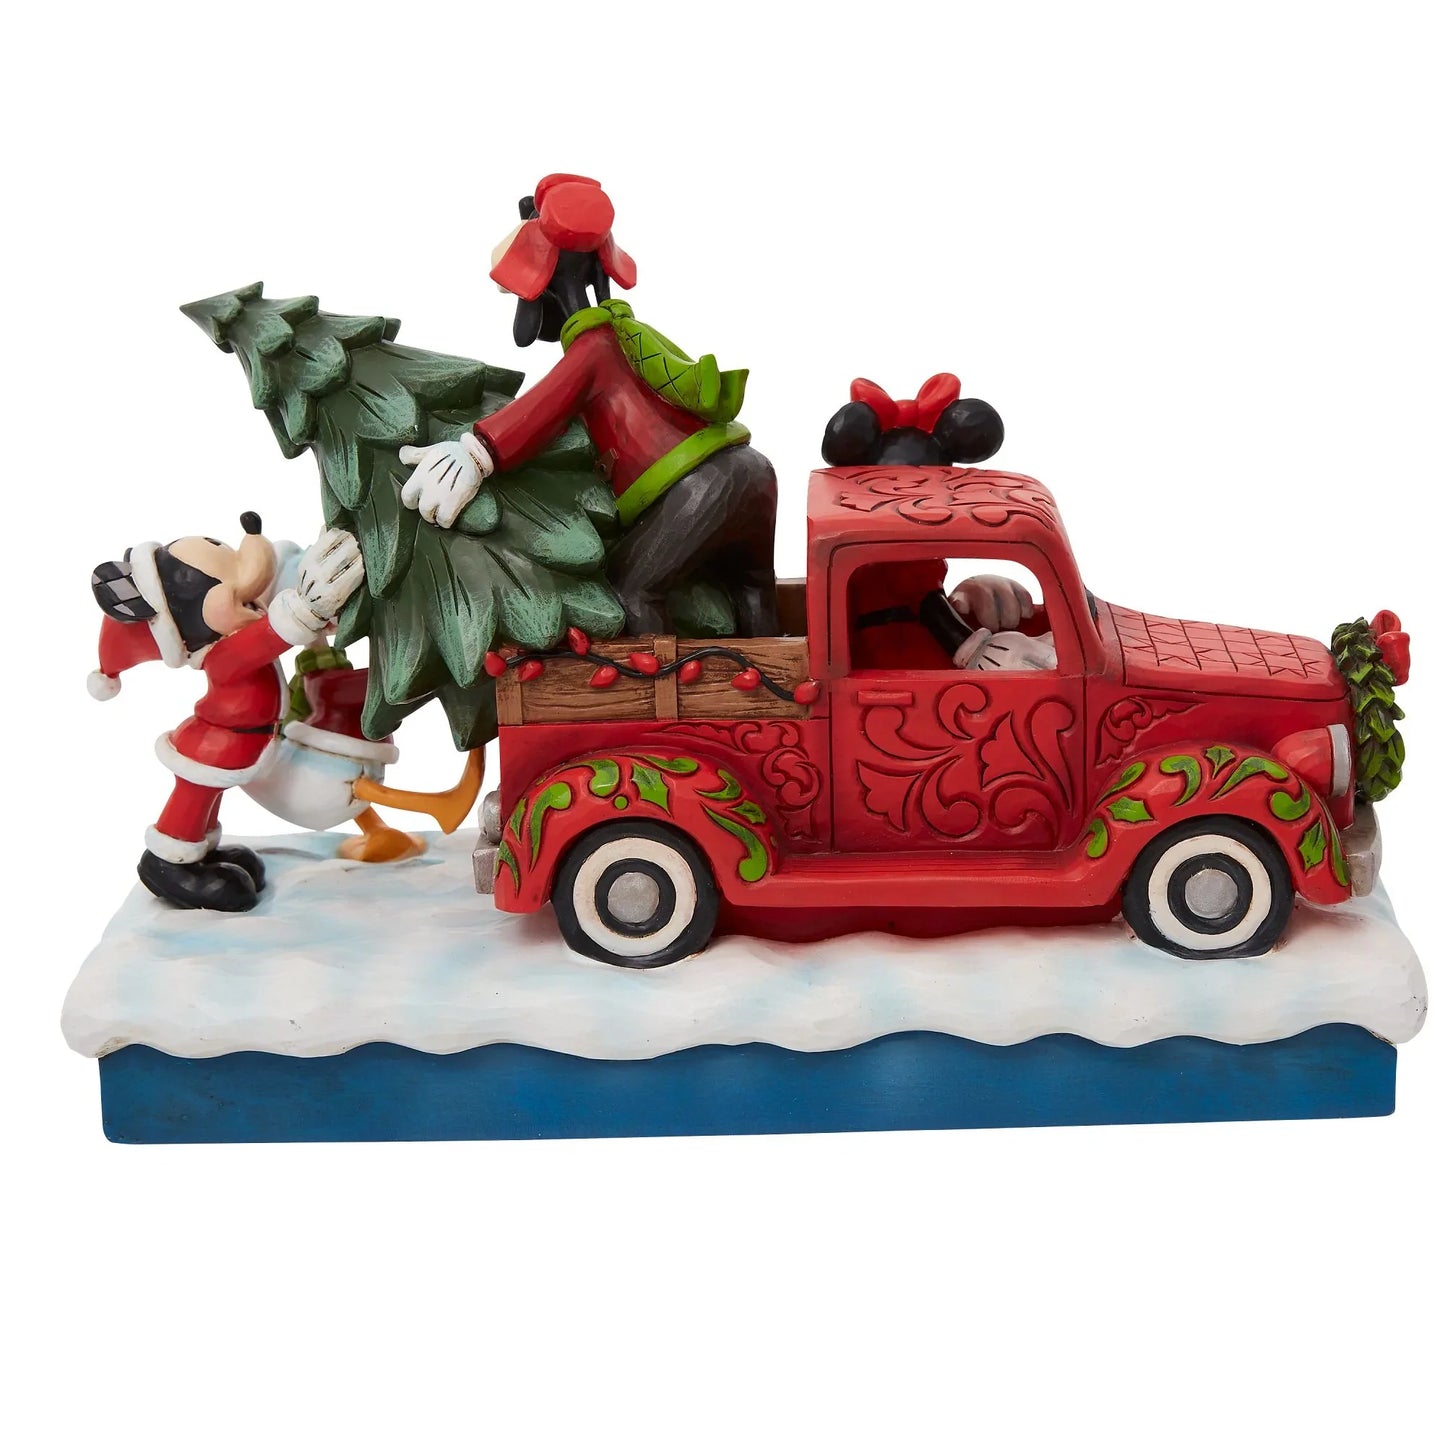 Mickey and Friends with Red Truck Statue - E & C Creations